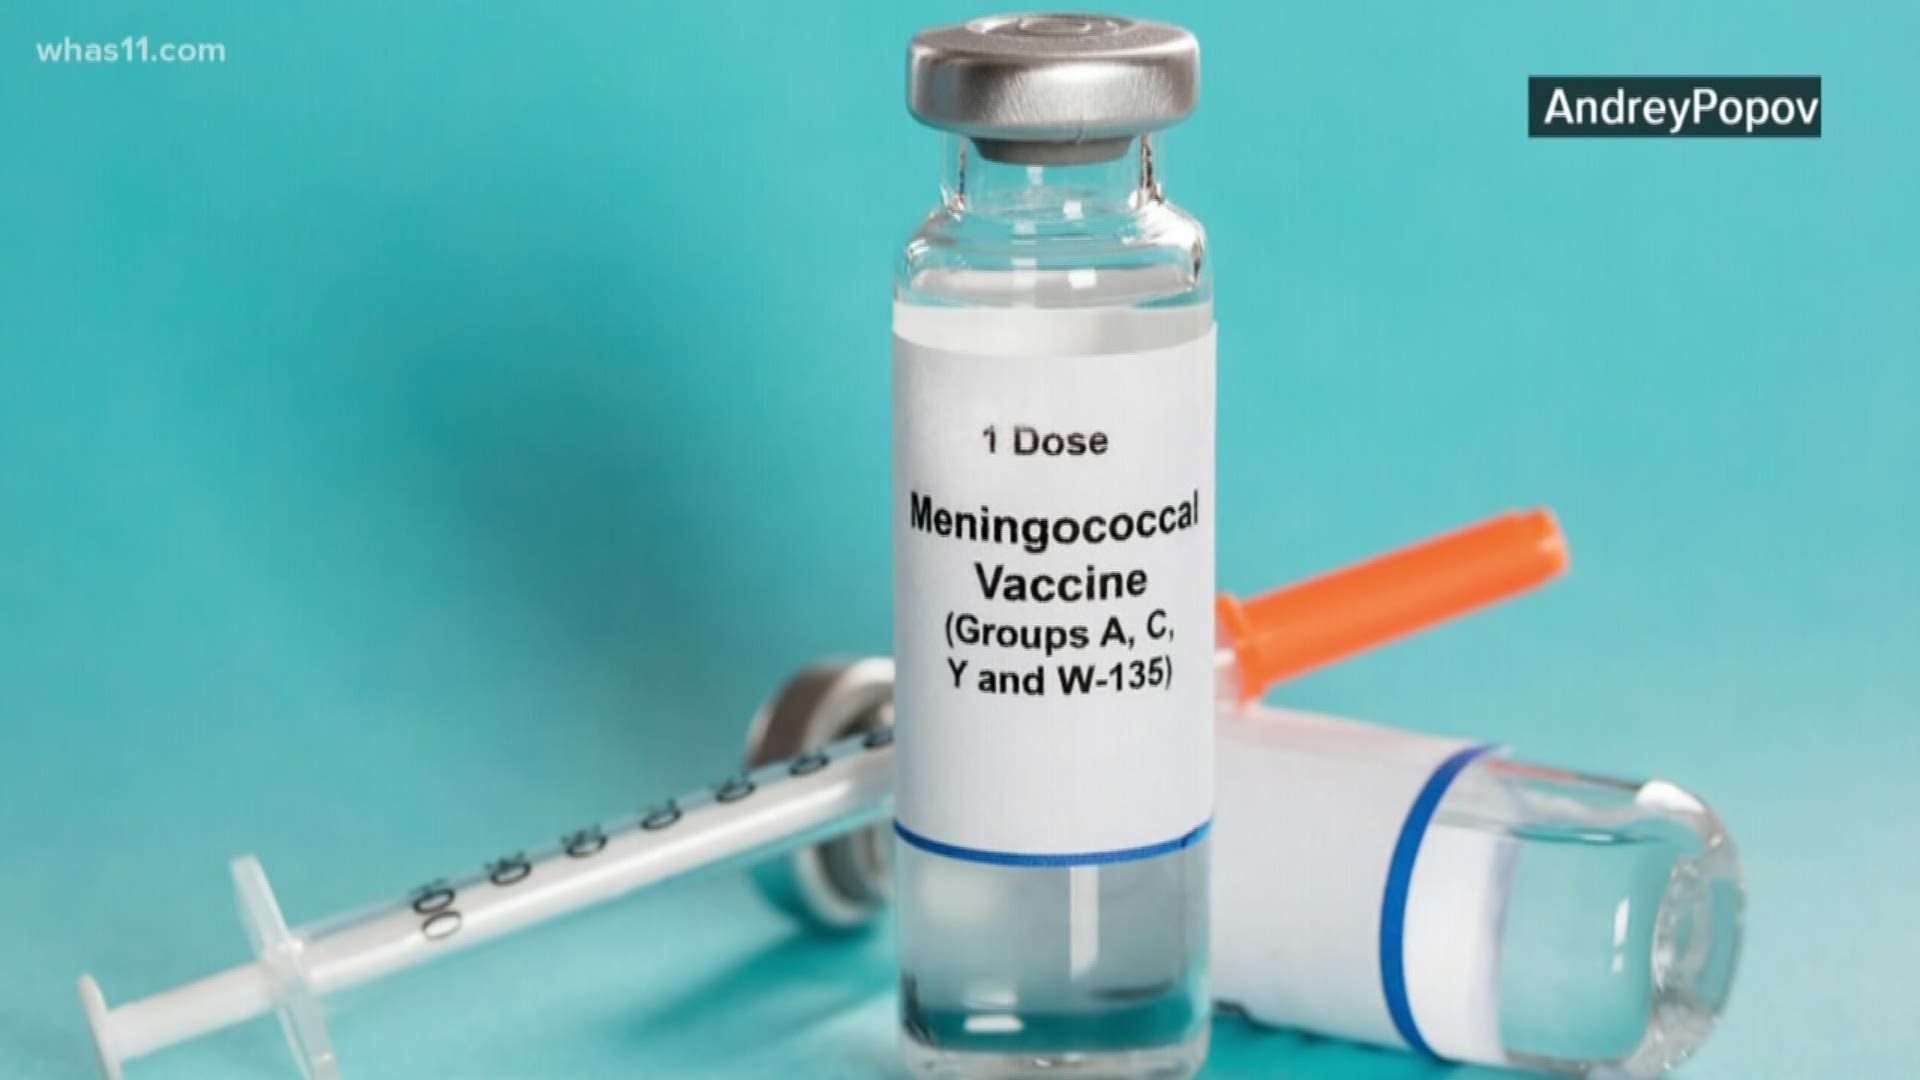 The vaccine debate centers around religion, but is there a case for it? Recent vaccine refusals prompted us to Verify one of the most controversial claims.